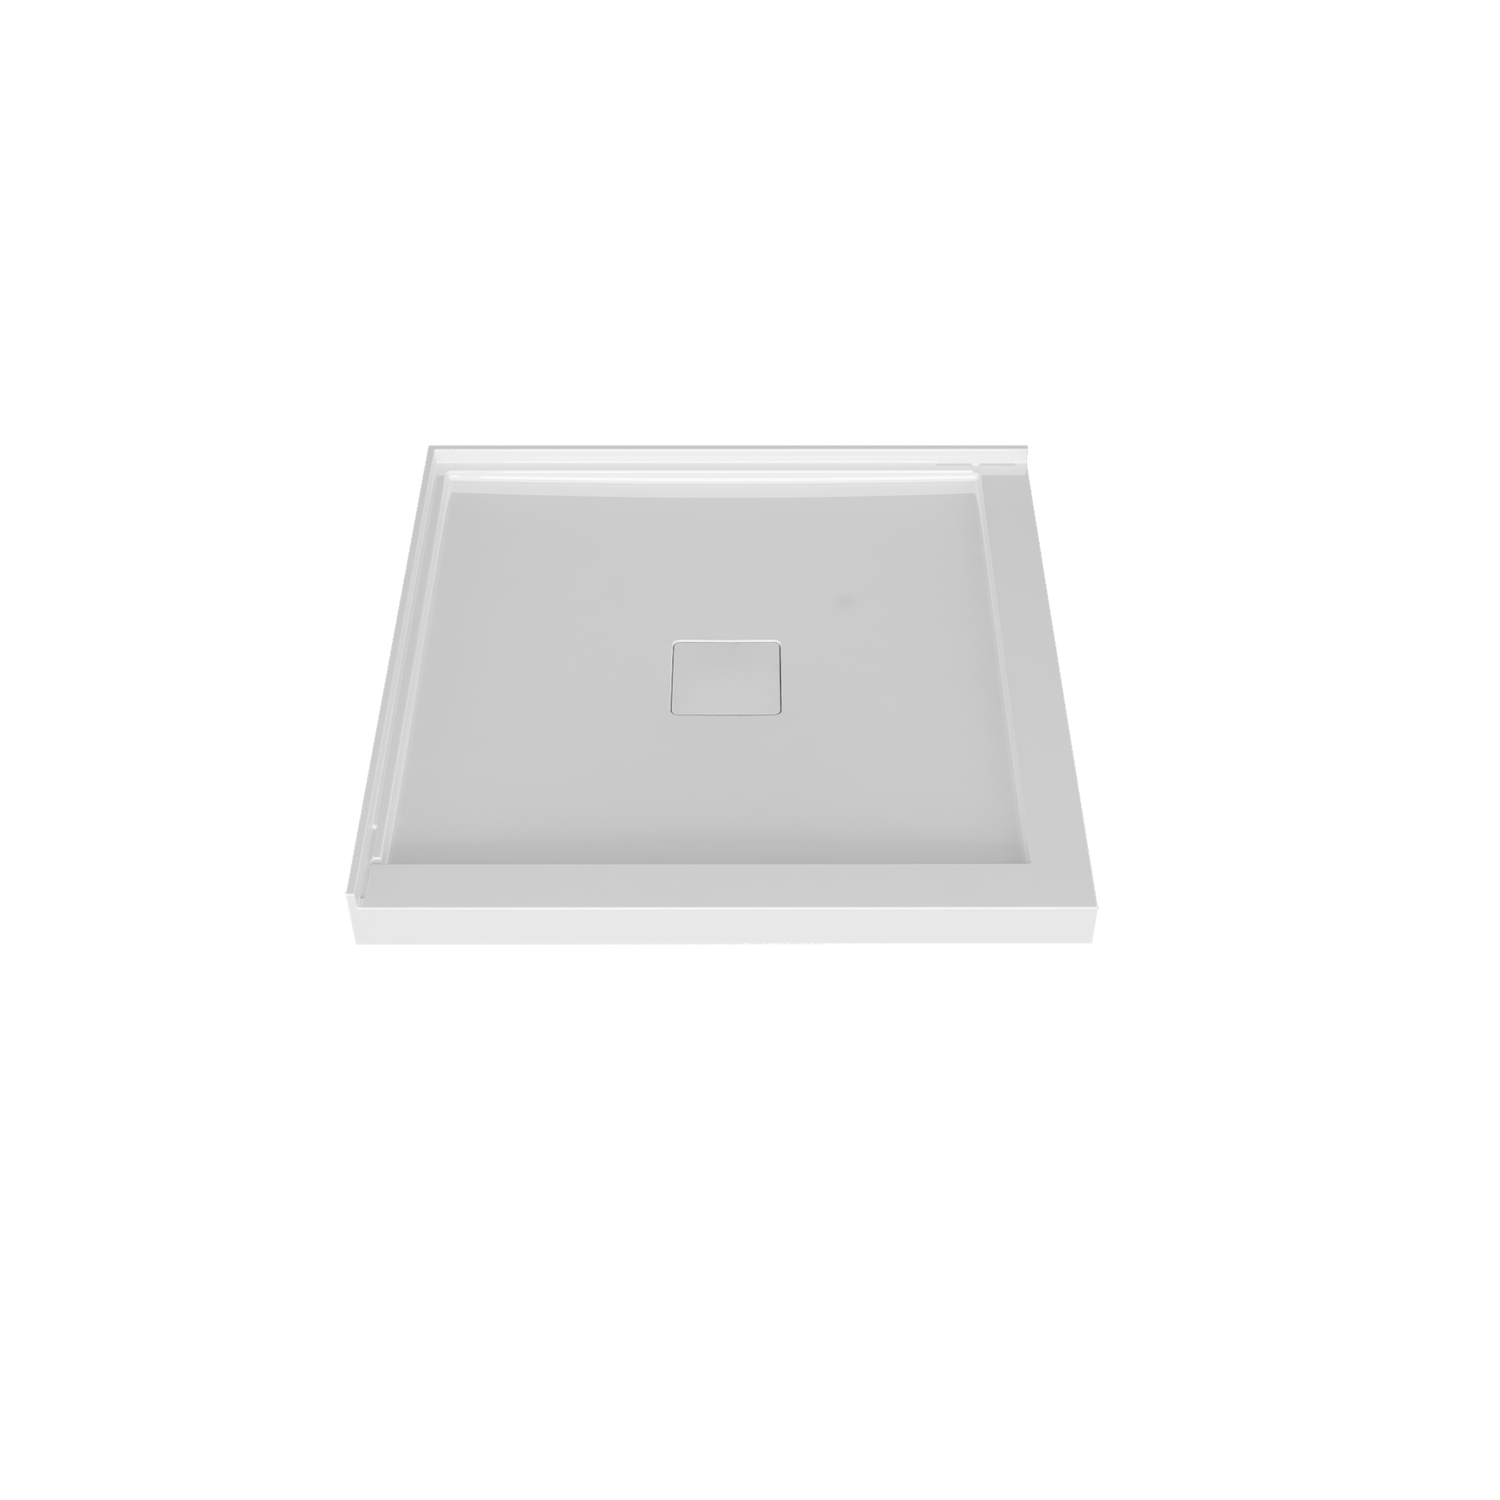 Shower base 42 x 42, in a corner, in glossy white